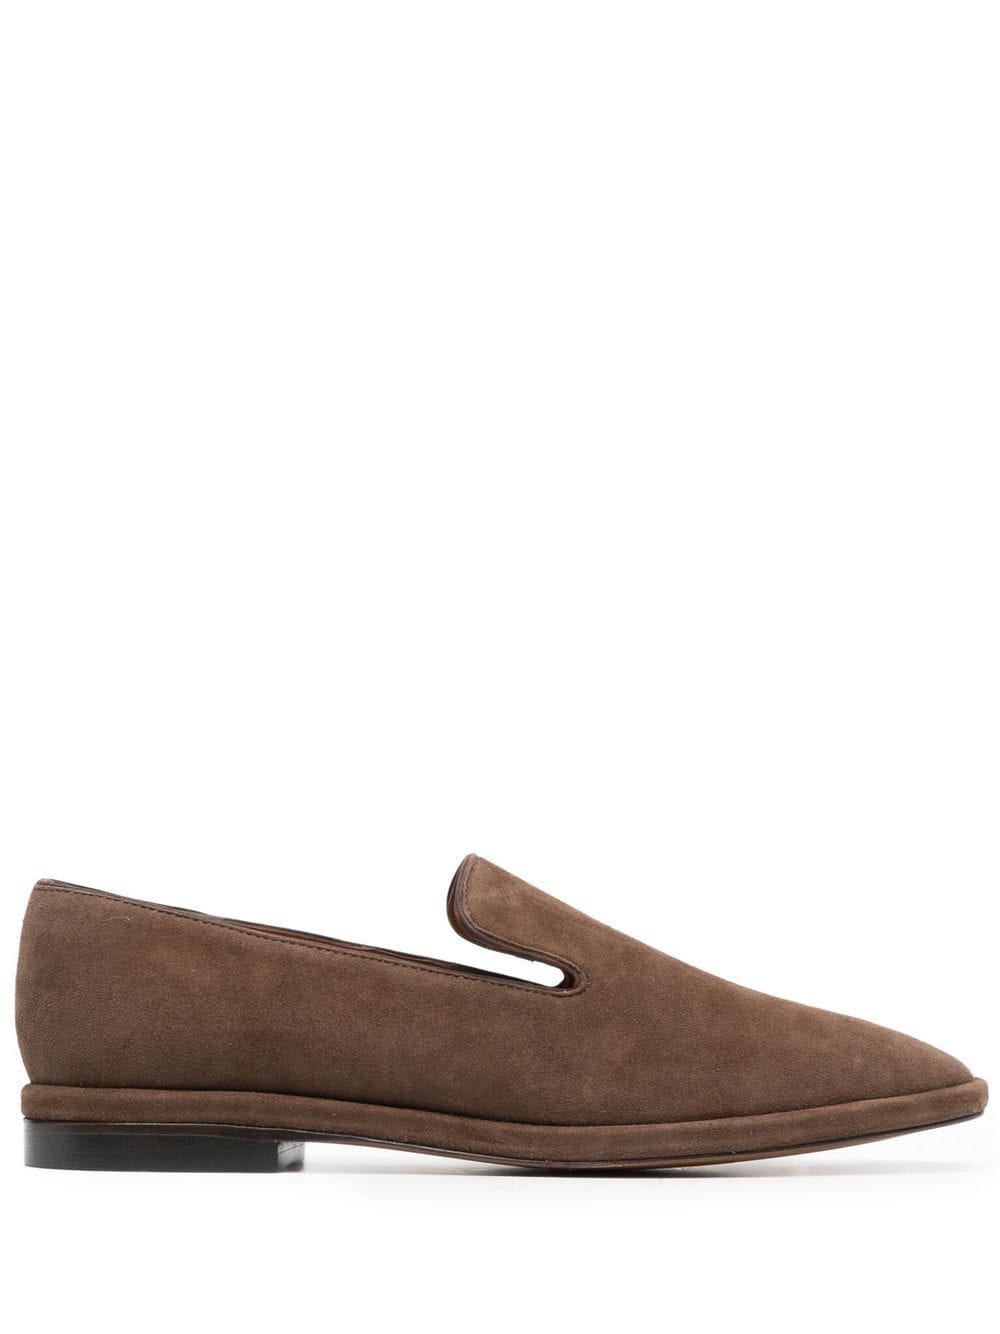 Clergerie Olympia slip-on loafers - Brown von Clergerie